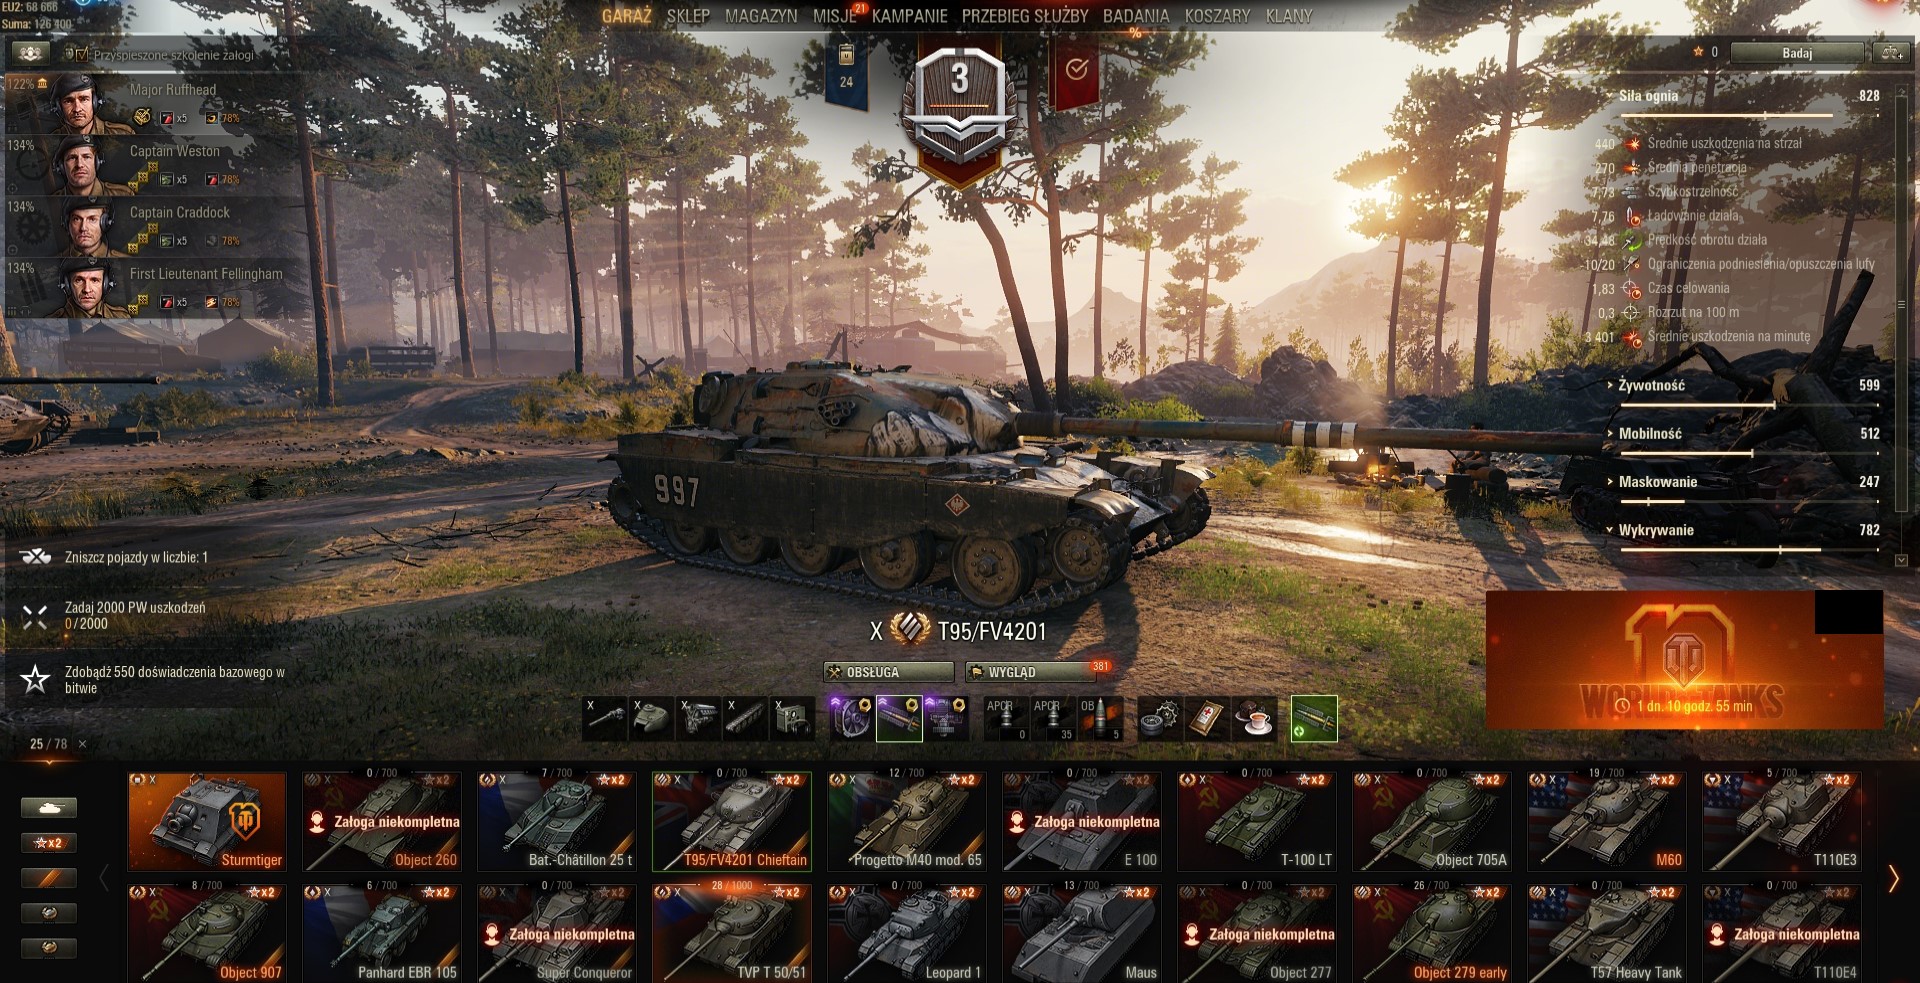 Sold World Of Tanks Unicum Account With Special Tanks 2600 Wn8 10k Pr A Lot Of 3moe Epicnpc Marketplace